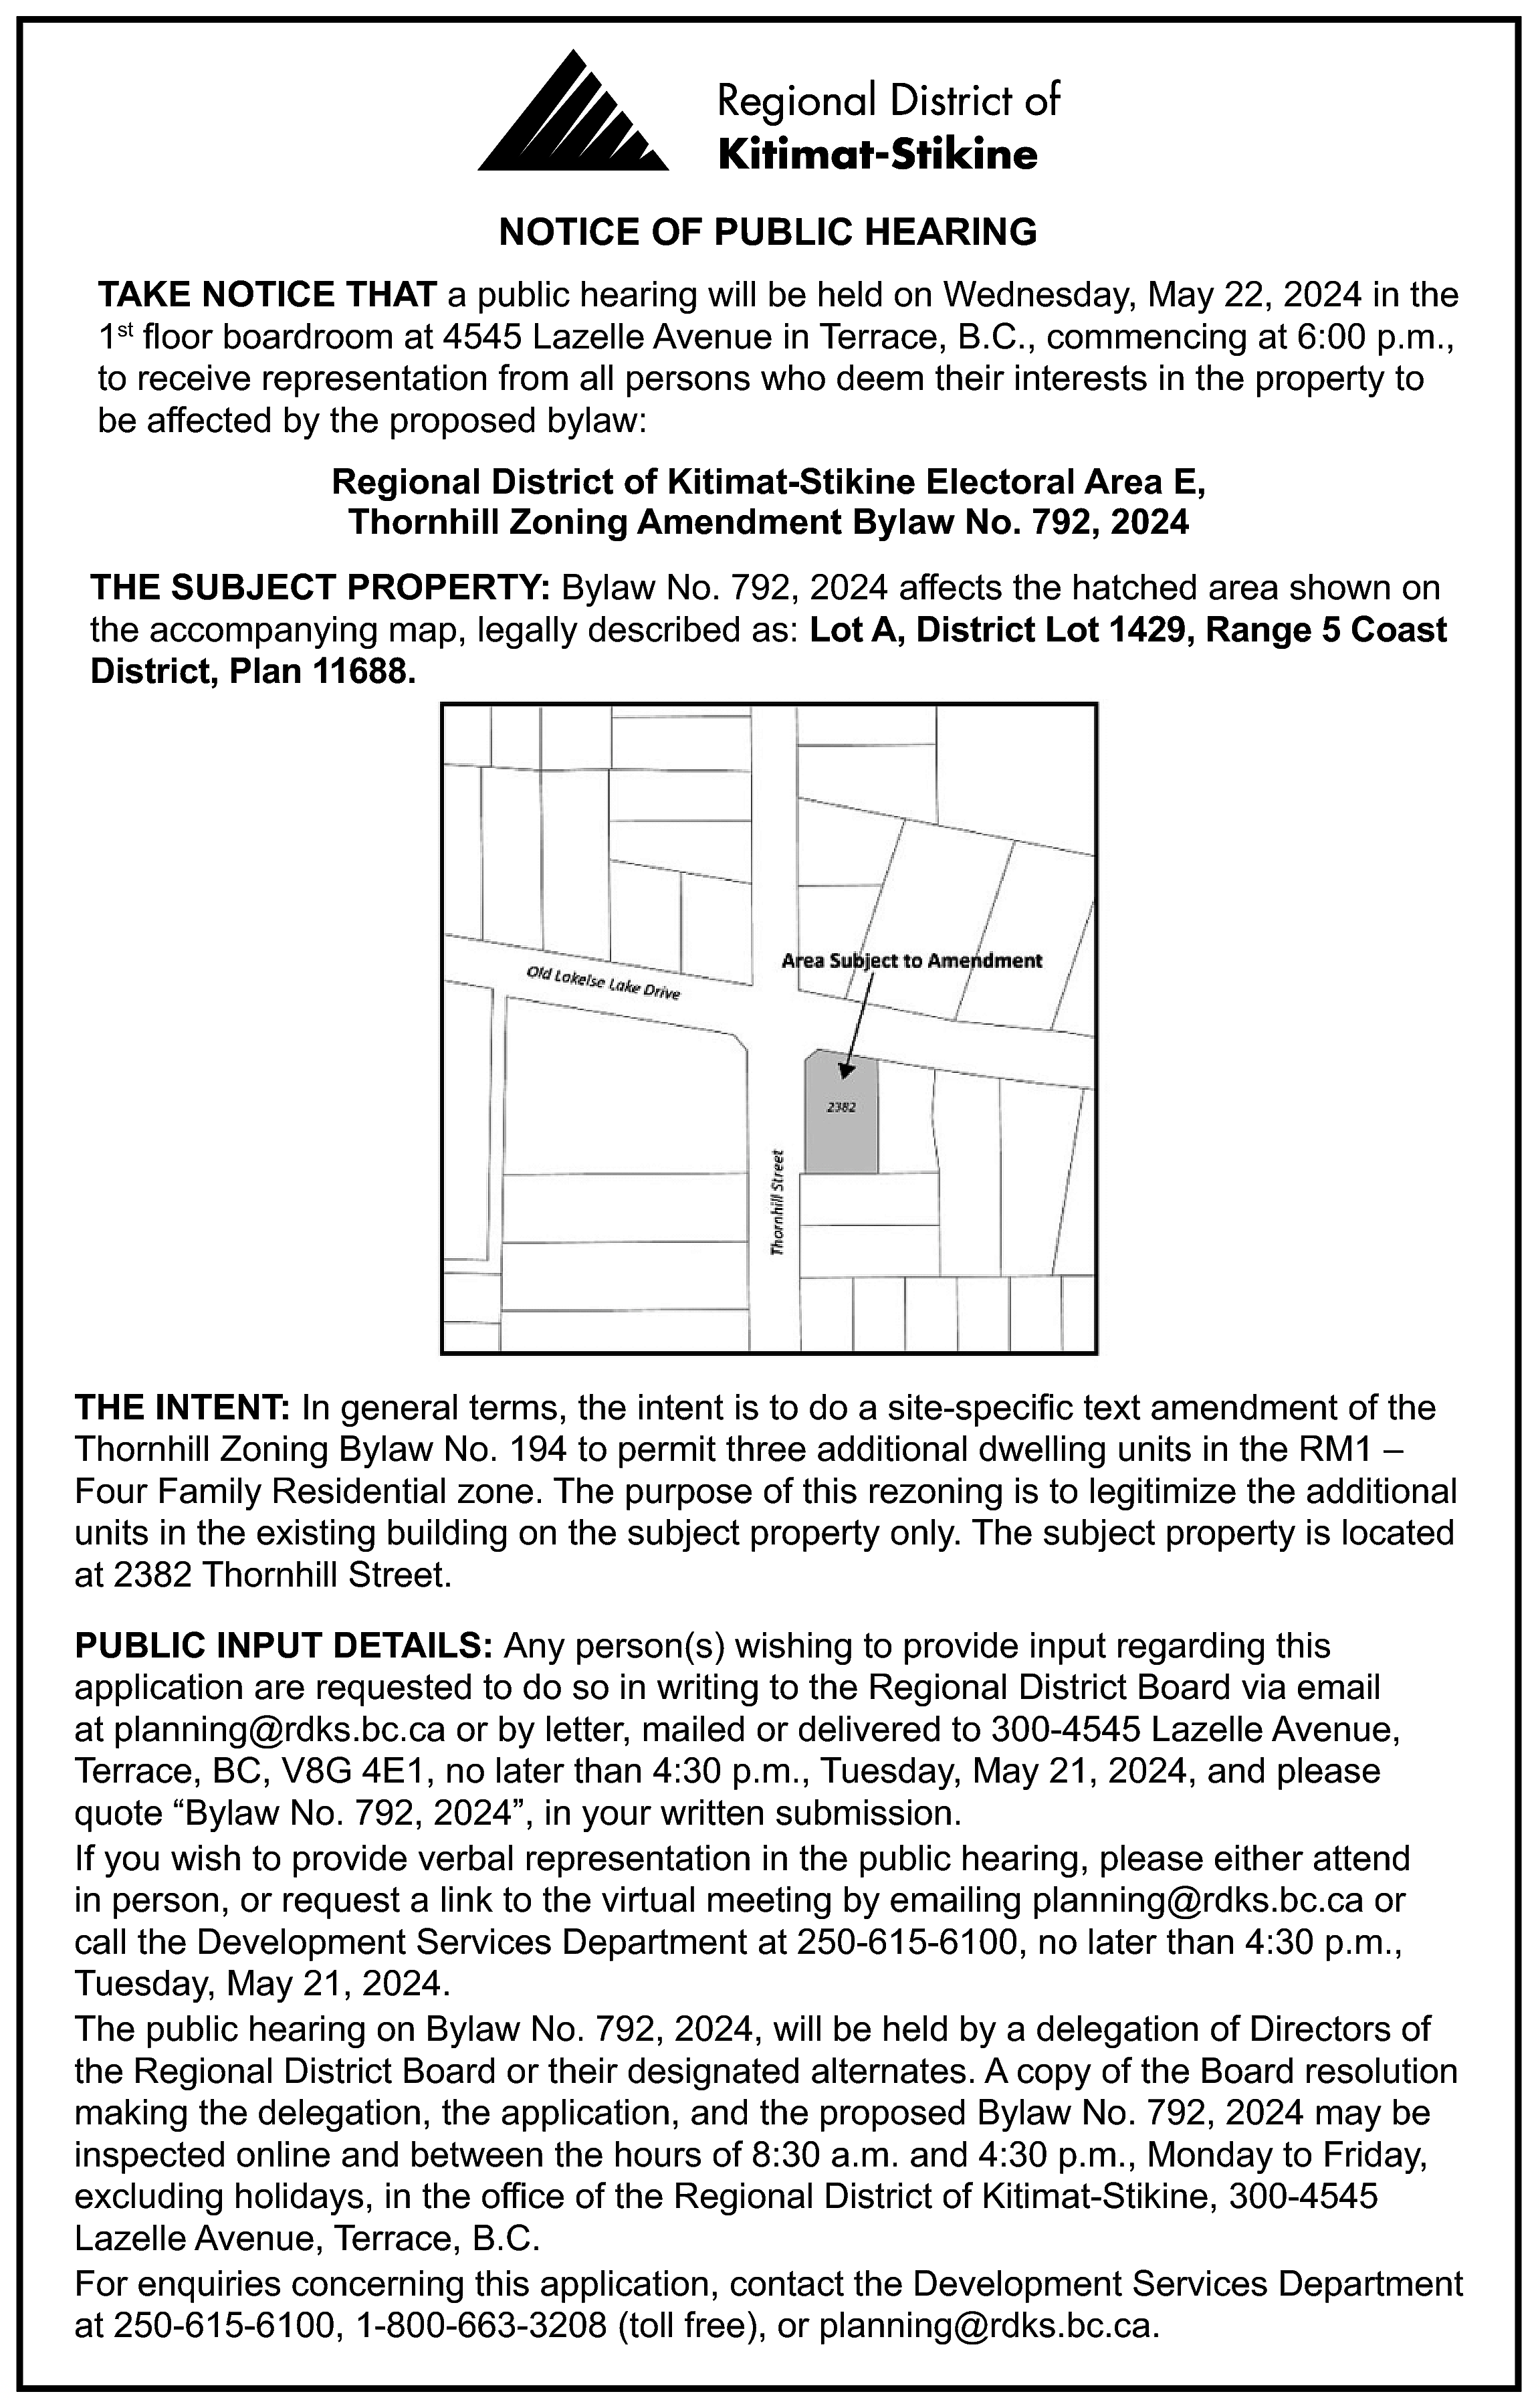 NOTICE OF PUBLIC HEARING <br>TAKE  NOTICE OF PUBLIC HEARING  TAKE NOTICE THAT a public hearing will be held on Wednesday, May 22, 2024 in the  1st floor boardroom at 4545 Lazelle Avenue in Terrace, B.C., commencing at 6:00 p.m.,  to receive representation from all persons who deem their interests in the property to  be affected by the proposed bylaw:  Regional District of Kitimat-Stikine Electoral Area E,  Thornhill Zoning Amendment Bylaw No. 792, 2024  THE SUBJECT PROPERTY: Bylaw No. 792, 2024 affects the hatched area shown on  the accompanying map, legally described as: Lot A, District Lot 1429, Range 5 Coast  District, Plan 11688.    THE INTENT: In general terms, the intent is to do a site-specific text amendment of the  Thornhill Zoning Bylaw No. 194 to permit three additional dwelling units in the RM1 –  Four Family Residential zone. The purpose of this rezoning is to legitimize the additional  units in the existing building on the subject property only. The subject property is located  at 2382 Thornhill Street.  PUBLIC INPUT DETAILS: Any person(s) wishing to provide input regarding this  application are requested to do so in writing to the Regional District Board via email  at planning@rdks.bc.ca or by letter, mailed or delivered to 300-4545 Lazelle Avenue,  Terrace, BC, V8G 4E1, no later than 4:30 p.m., Tuesday, May 21, 2024, and please  quote “Bylaw No. 792, 2024”, in your written submission.  If you wish to provide verbal representation in the public hearing, please either attend  in person, or request a link to the virtual meeting by emailing planning@rdks.bc.ca or  call the Development Services Department at 250-615-6100, no later than 4:30 p.m.,  Tuesday, May 21, 2024.  The public hearing on Bylaw No. 792, 2024, will be held by a delegation of Directors of  the Regional District Board or their designated alternates. A copy of the Board resolution  making the delegation, the application, and the proposed Bylaw No. 792, 2024 may be  inspected online and between the hours of 8:30 a.m. and 4:30 p.m., Monday to Friday,  excluding holidays, in the office of the Regional District of Kitimat-Stikine, 300-4545  Lazelle Avenue, Terrace, B.C.  For enquiries concerning this application, contact the Development Services Department  at 250-615-6100, 1-800-663-3208 (toll free), or planning@rdks.bc.ca.    